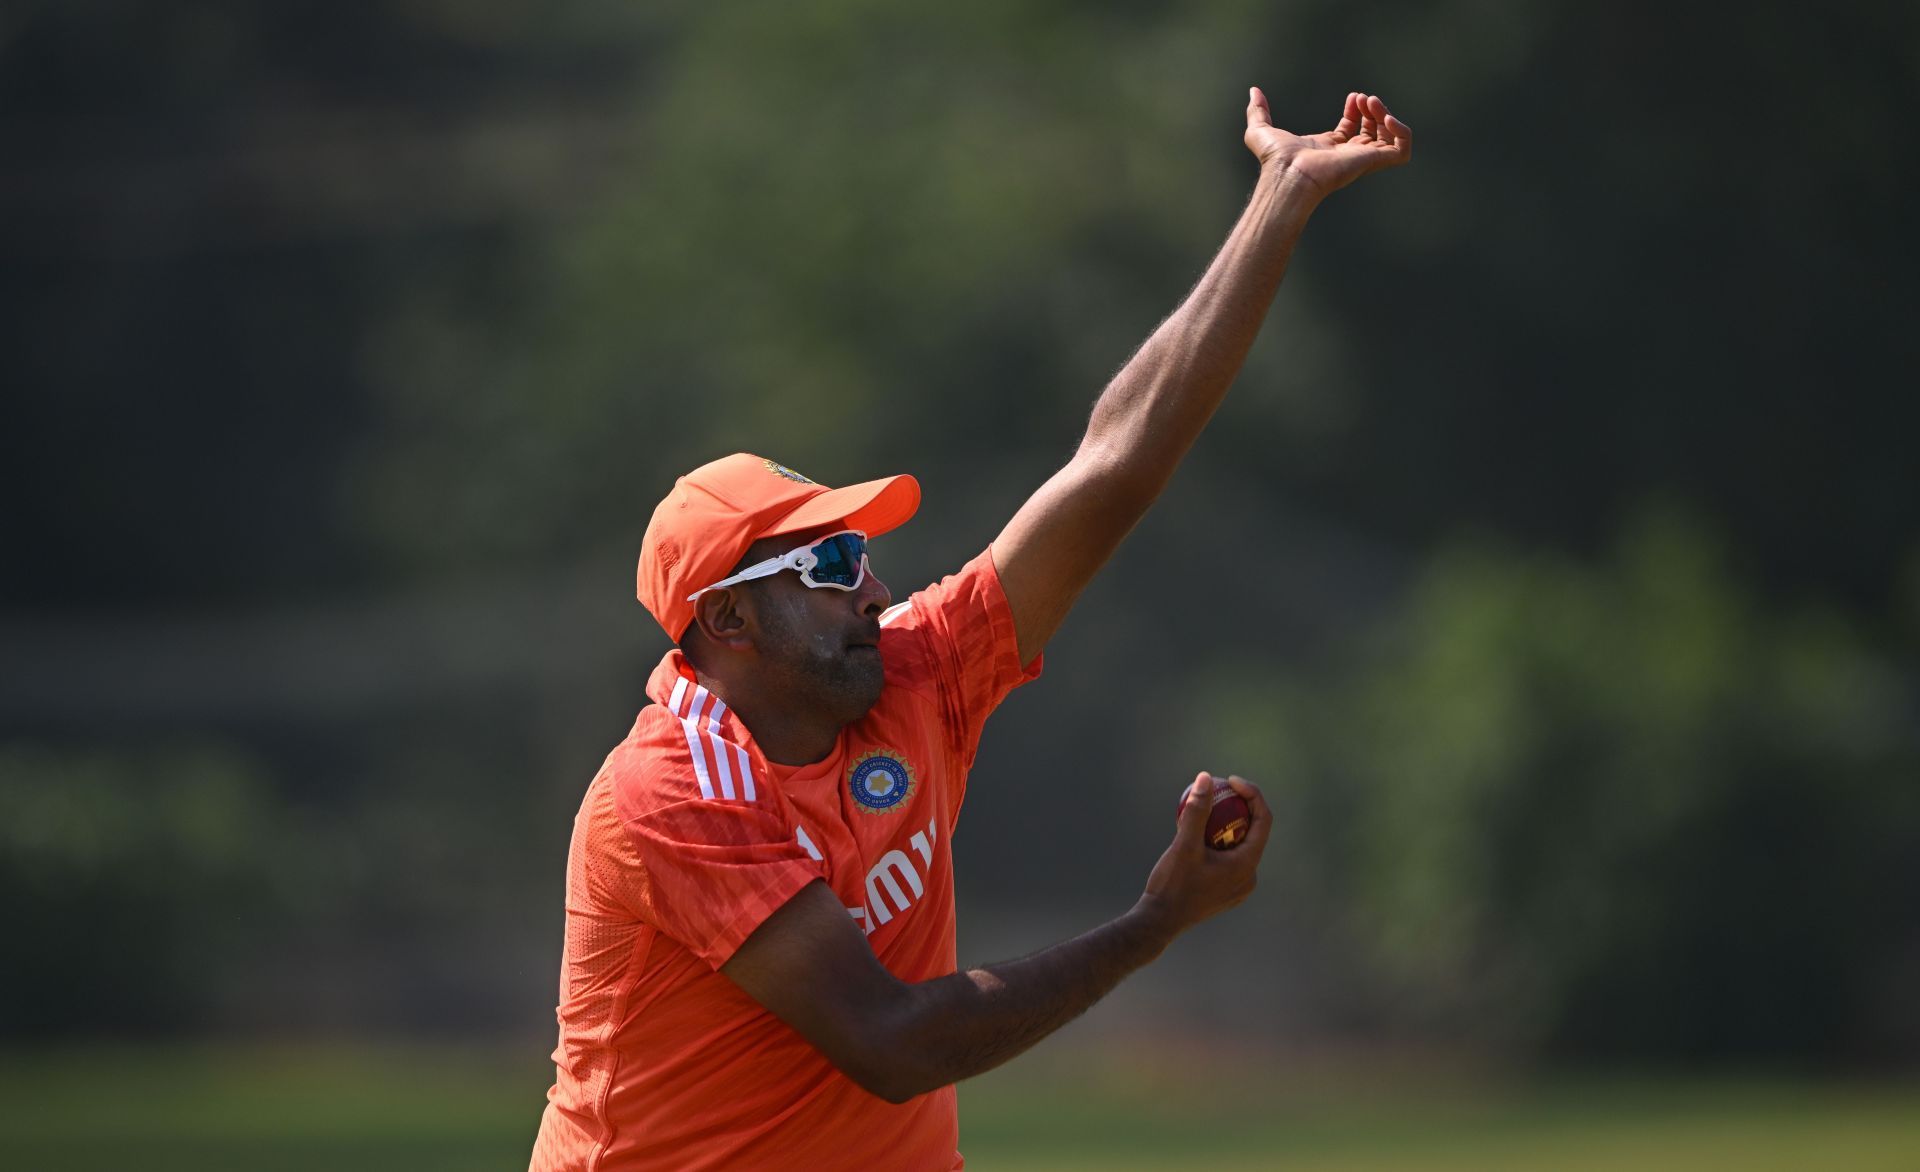 Ravichandran Ashwin will need to lead the spin attack in Vizag